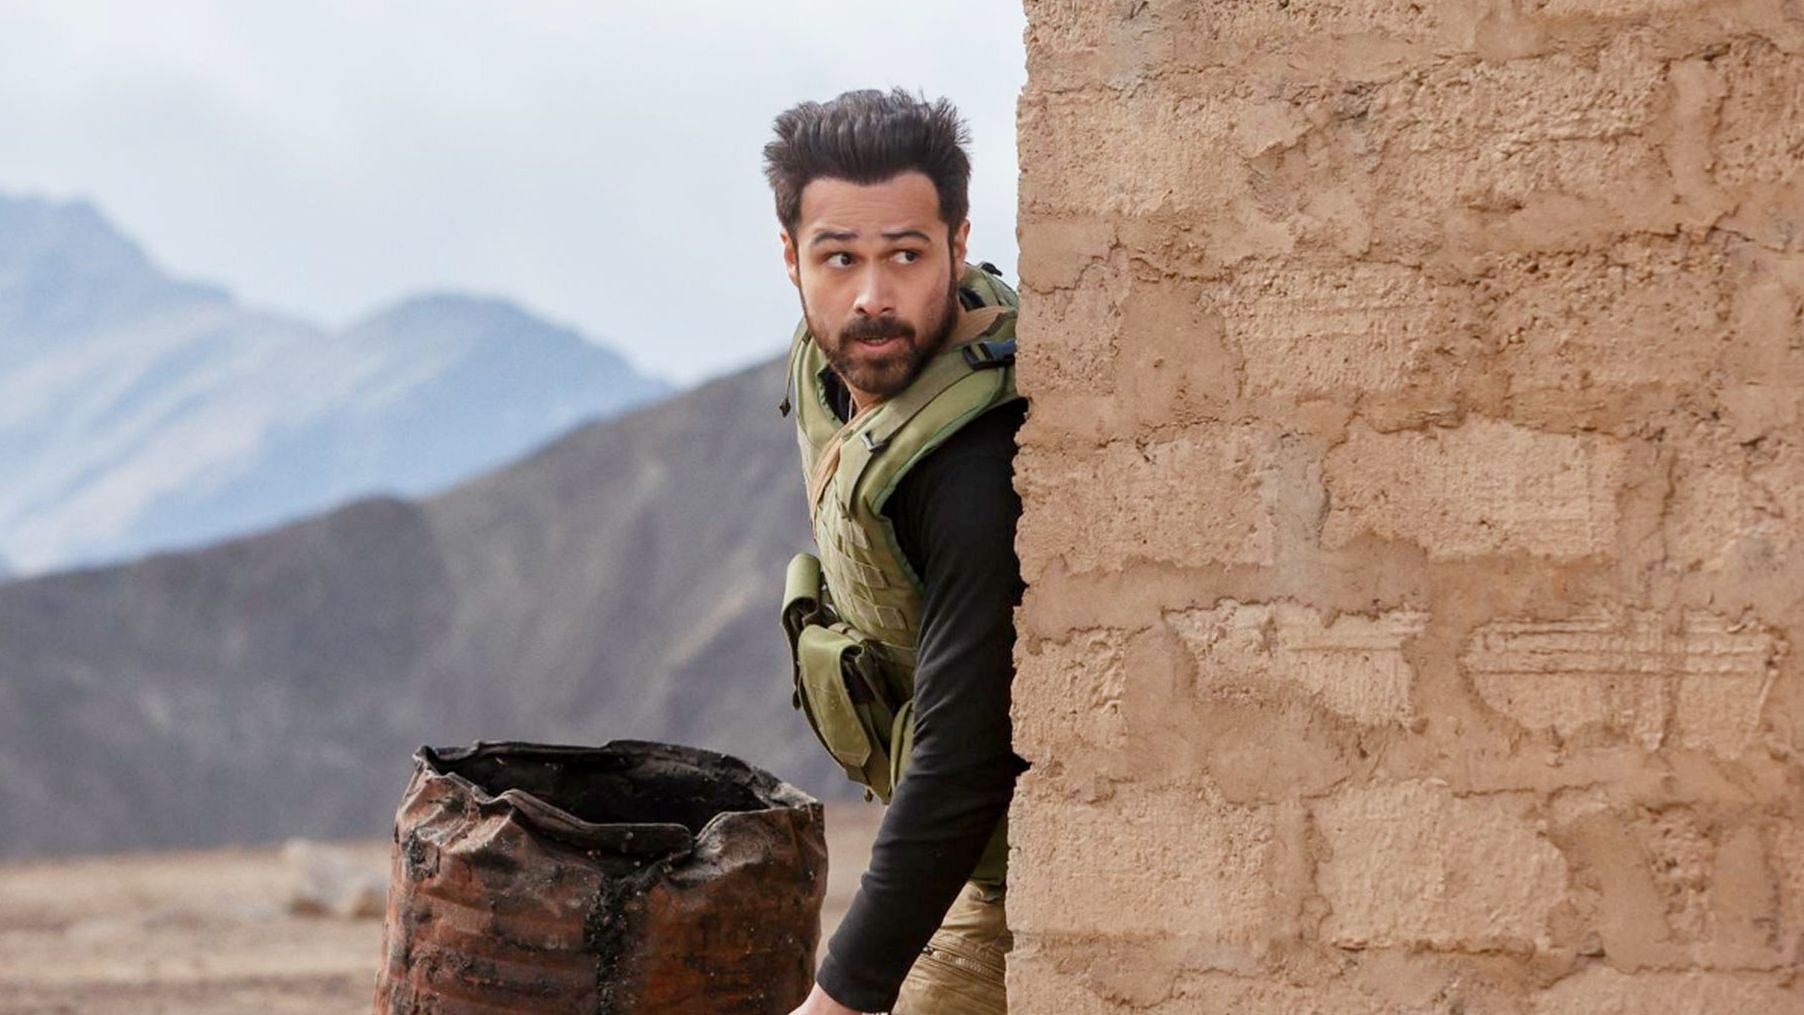 Emraan Hashmi in a still from the show.